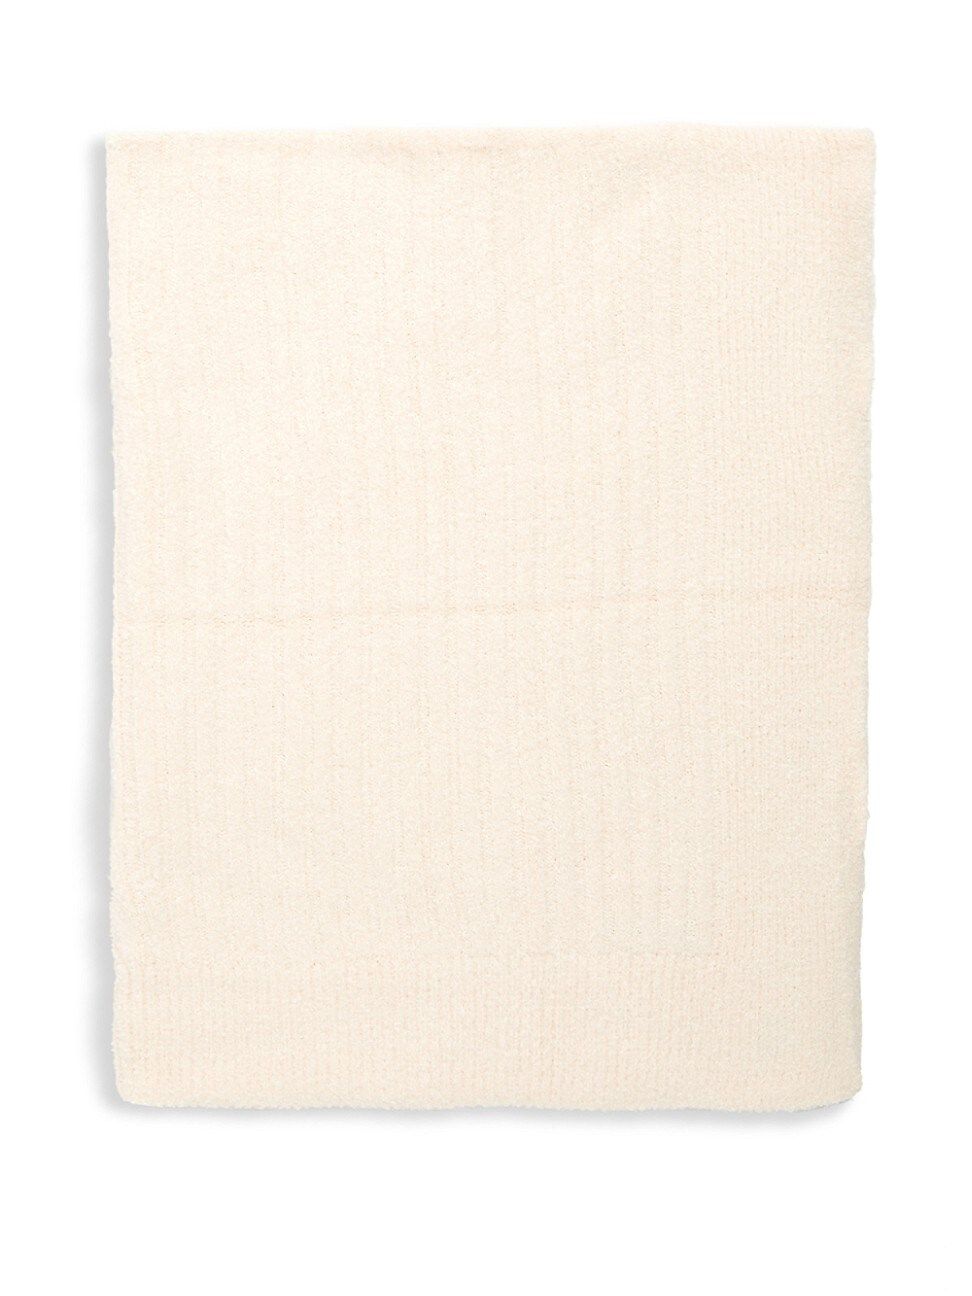 Barefoot Dreams Baby's Cozy Chic Light Ribbed Blanket - Pink | Saks Fifth Avenue